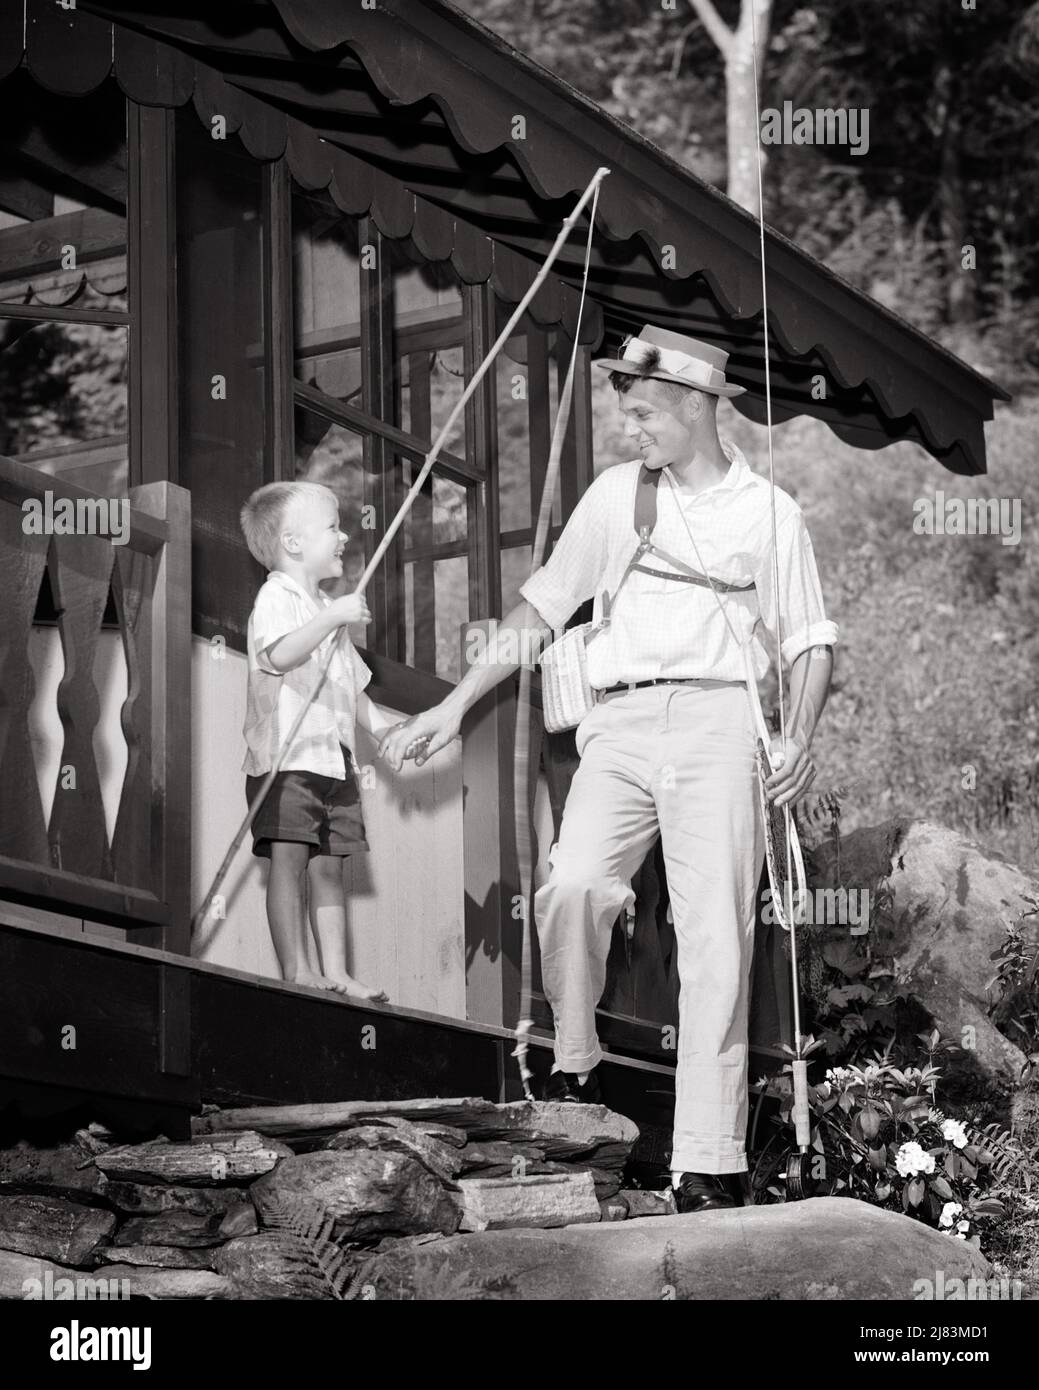 https://c8.alamy.com/comp/2J83MD1/1950s-little-barefoot-boy-with-fishing-pole-holding-hands-with-dad-with-fishing-gear-to-go-fly-fishing-in-front-of-cabin-j1610-har001-hars-old-time-stick-nostalgia-gear-old-fashion-1-juvenile-style-pole-young-adult-net-teamwork-fly-sons-abstract-pleased-families-joy-lifestyle-religion-architecture-celebration-houses-fisherman-rural-home-life-copy-space-friendship-full-length-persons-residential-go-caring-males-buildings-cabin-fathers-bw-summertime-goals-happiness-fishing-pole-cheerful-adventure-property-dads-excitement-exterior-low-angle-father-and-son-pride-holding-hands-barefoot-homes-2J83MD1.jpg